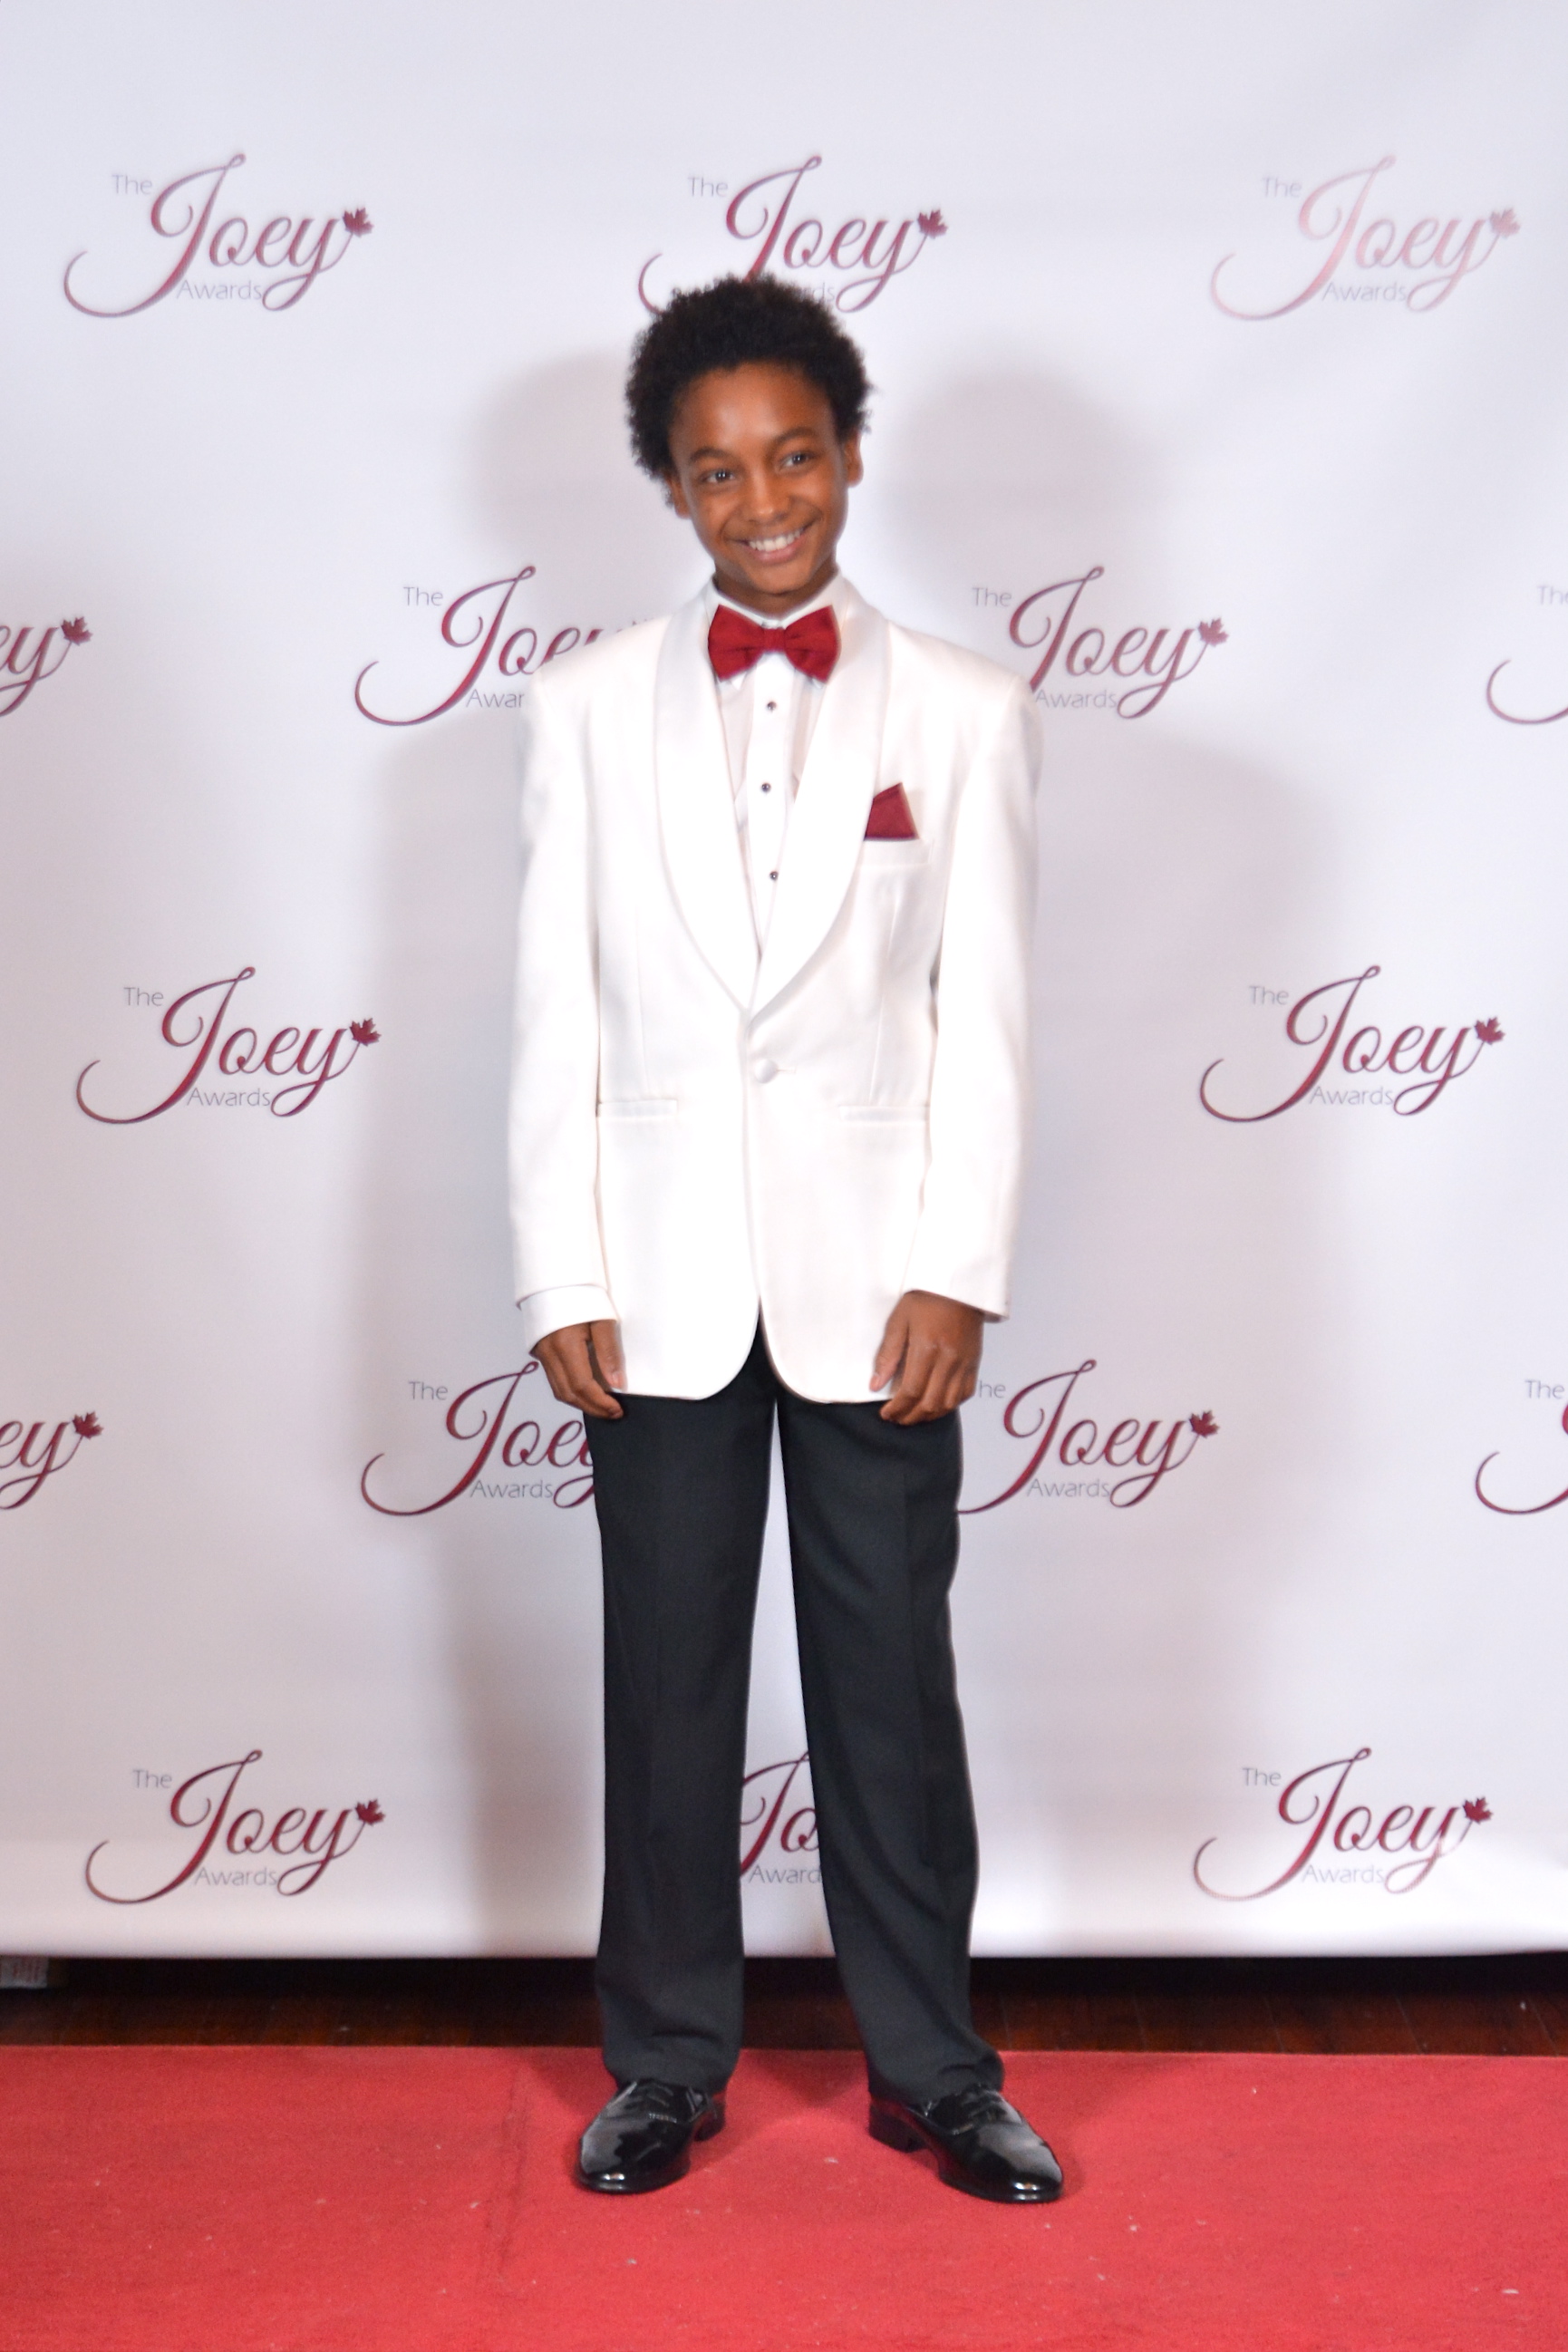 Elijha on the red carpet at the 2014 Joey Awards in Vancouver